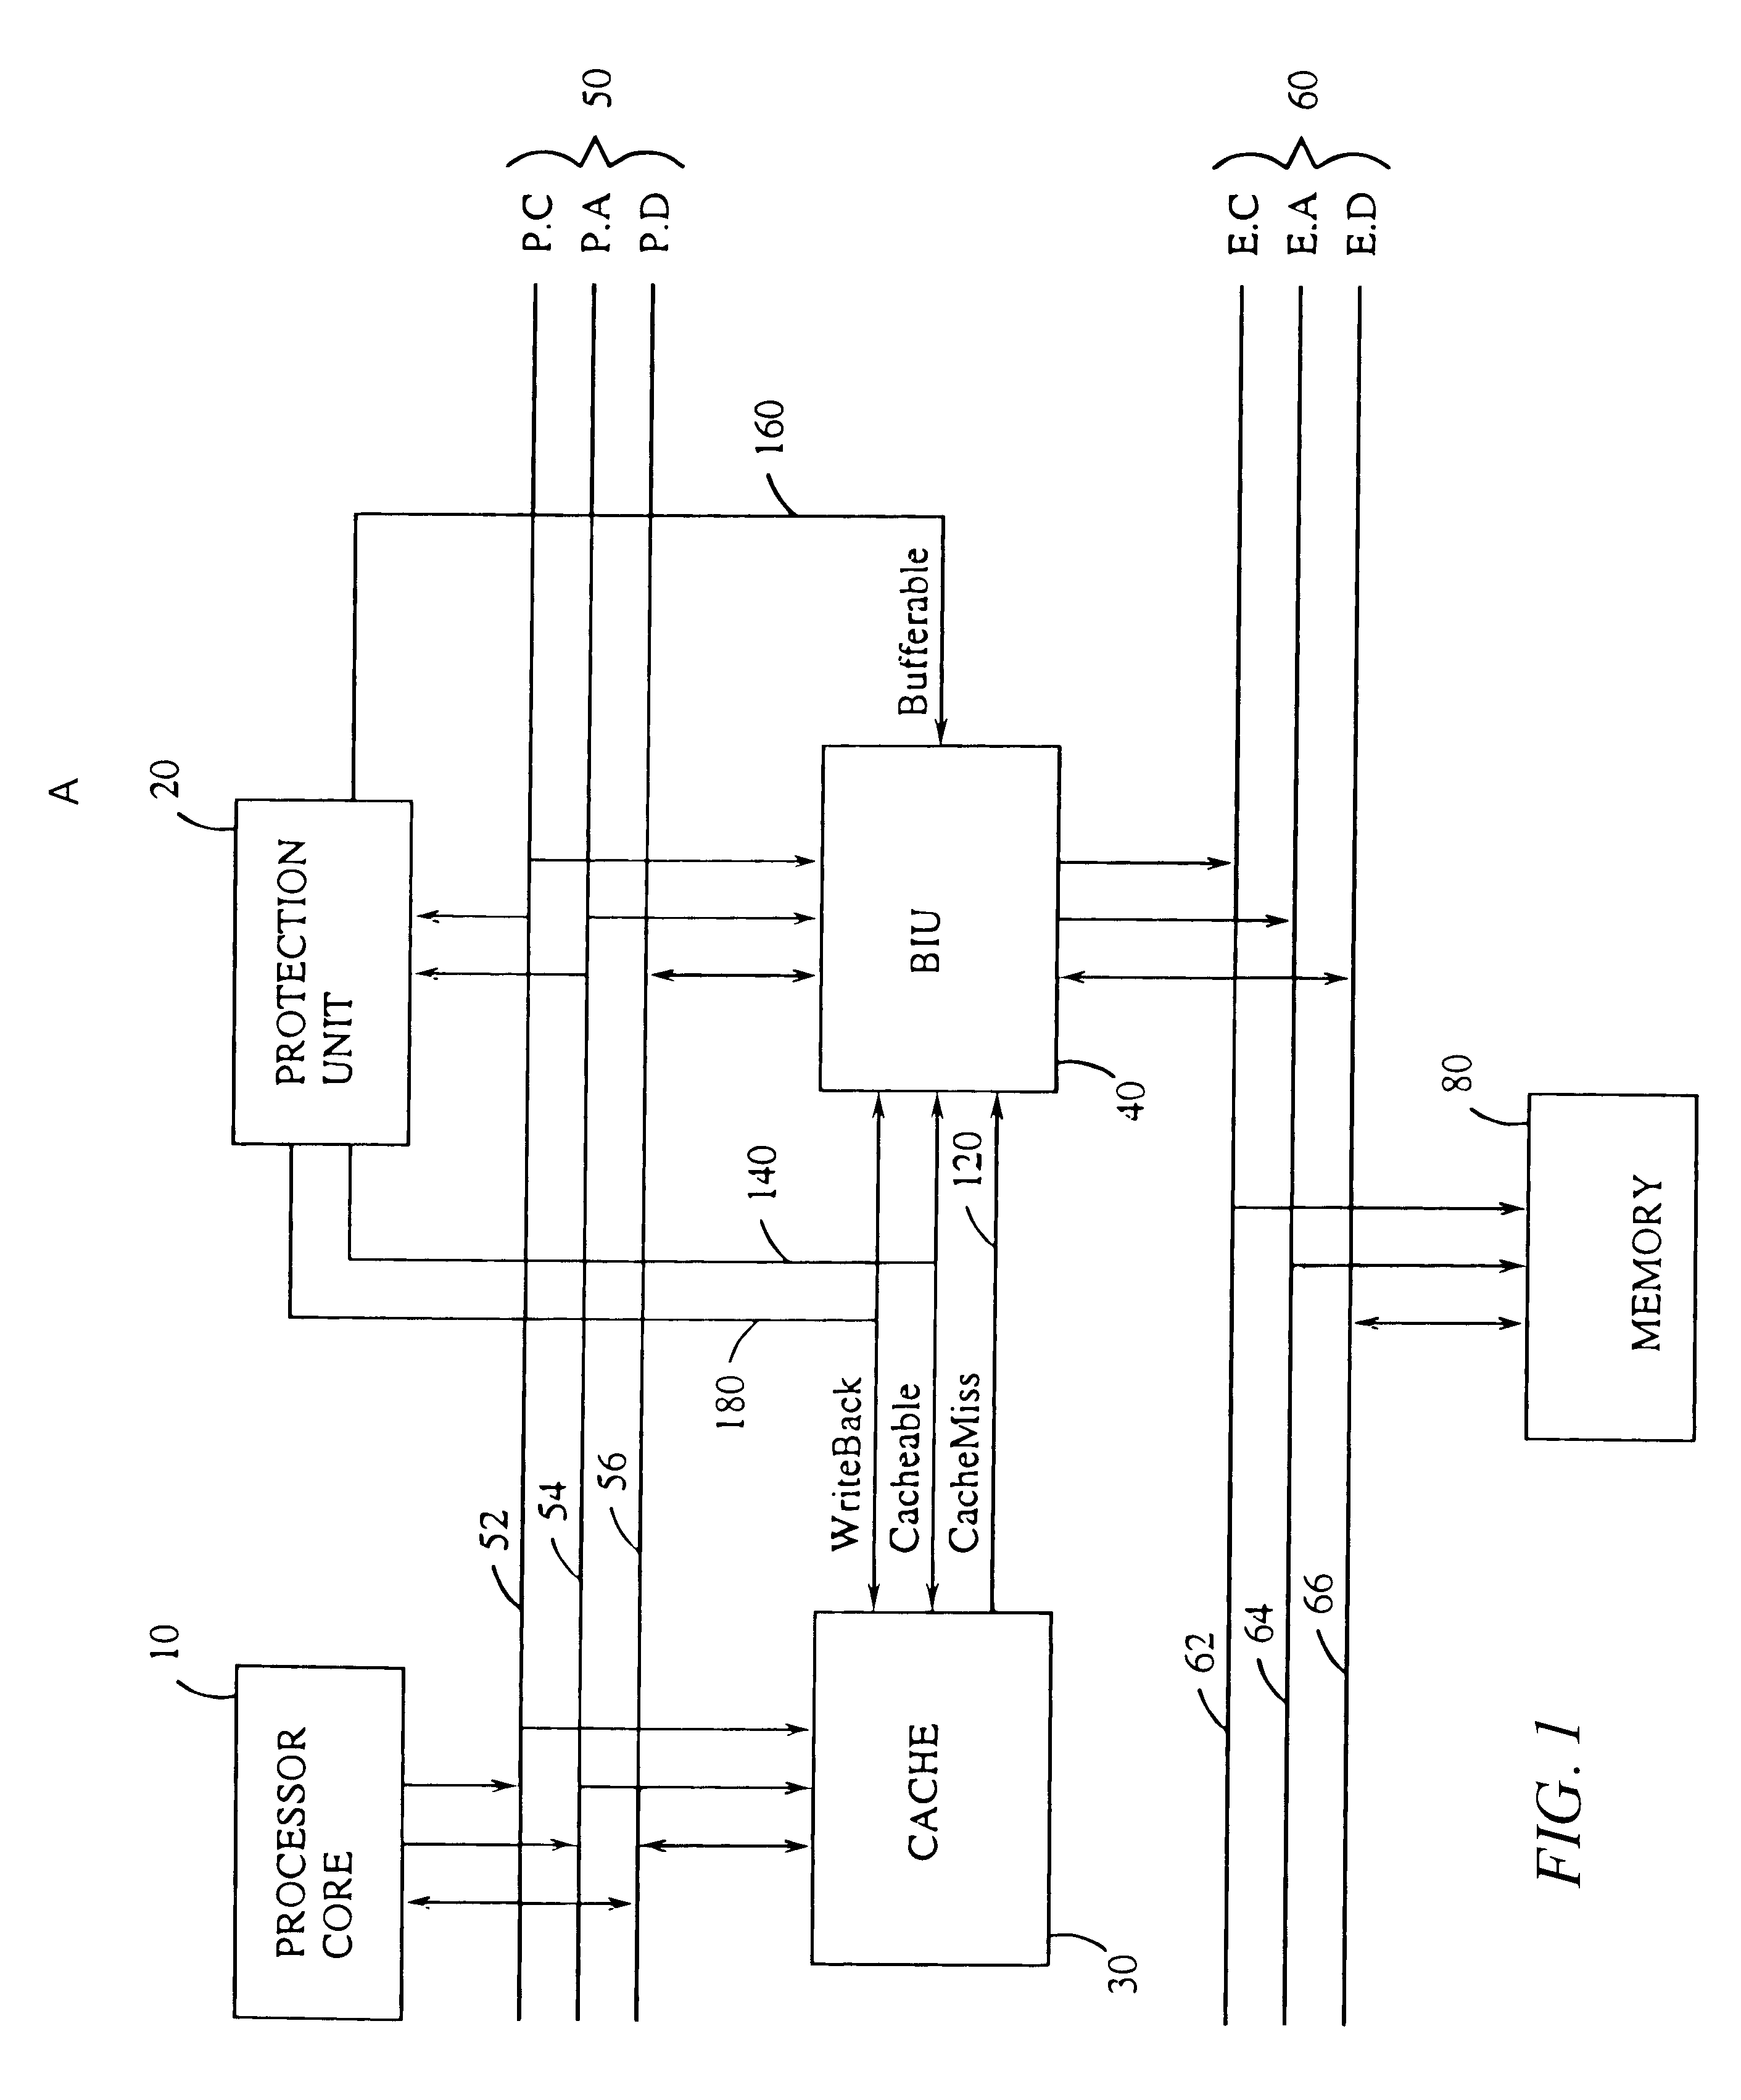 Management of caches in a data processing apparatus